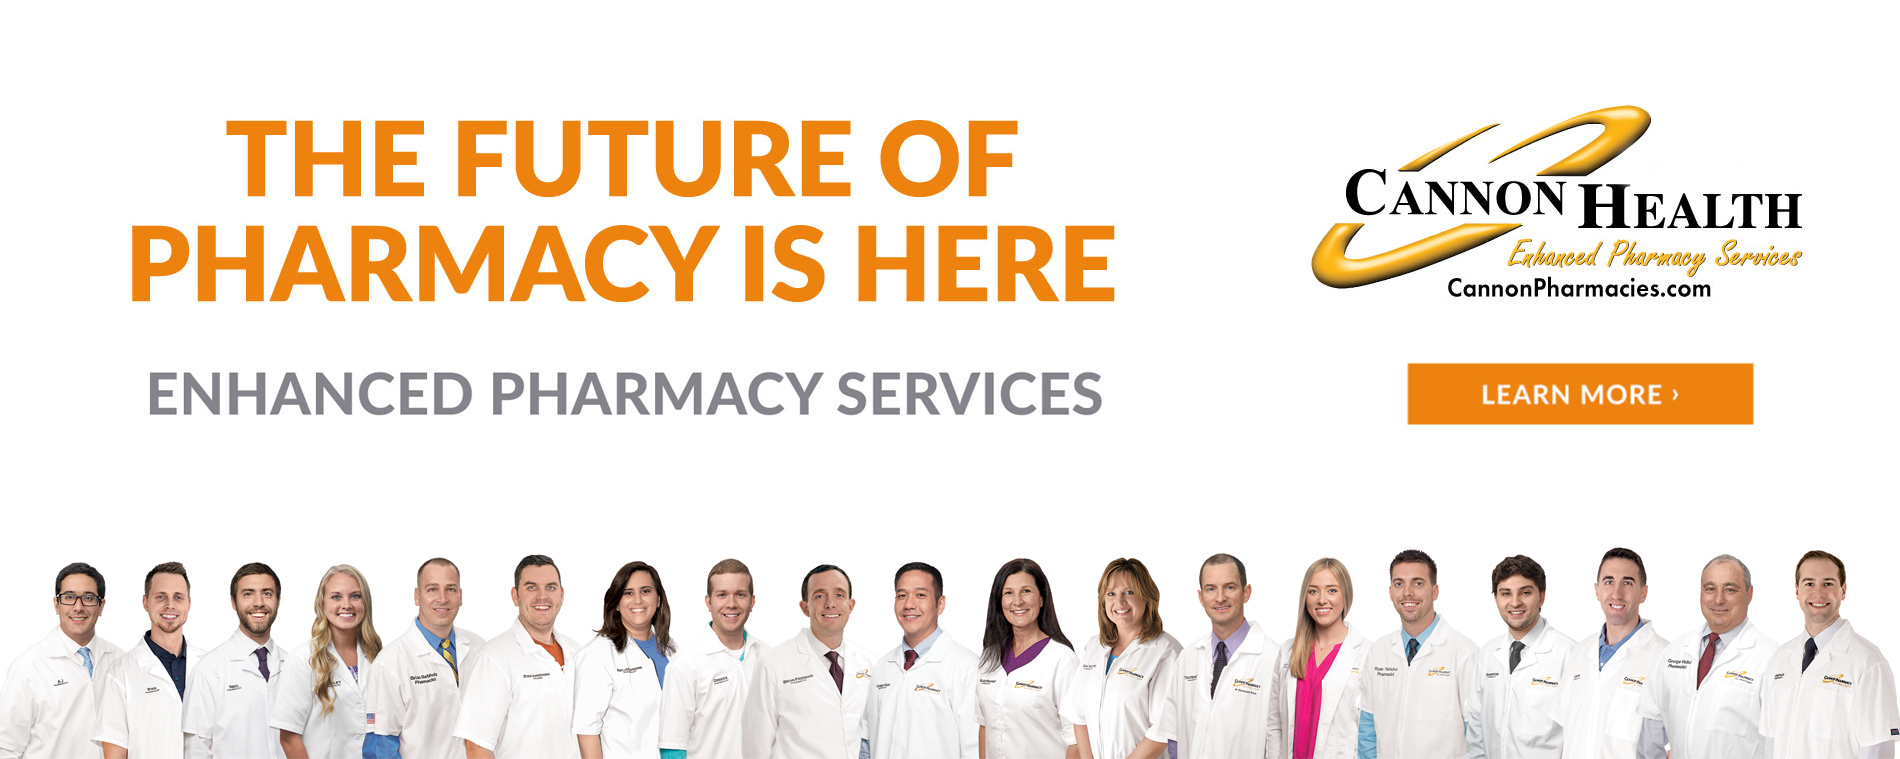 the future of pharmacy is here